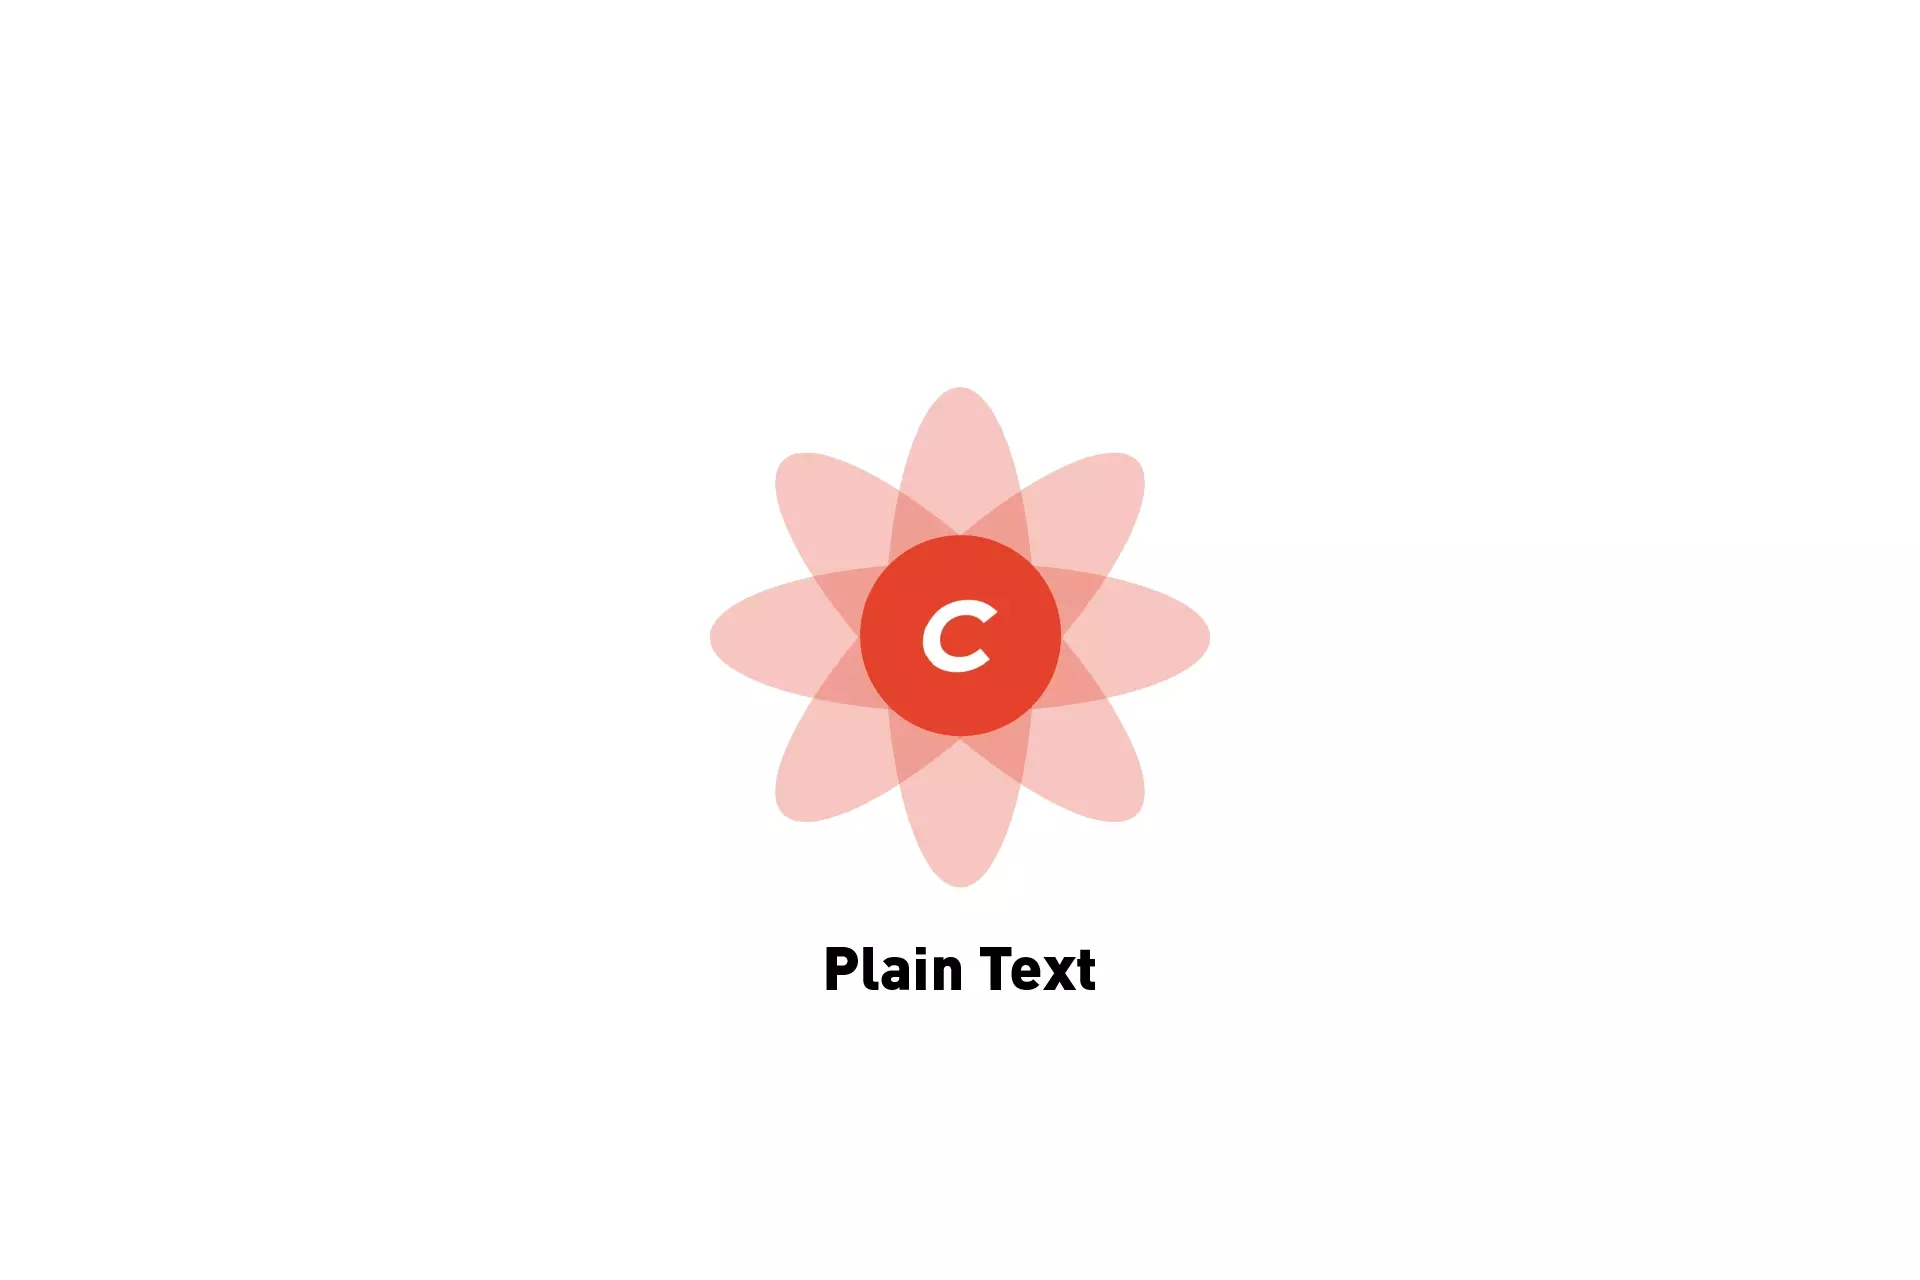 A flower that represents Craft CMS. Beneath it sits the text "Plain Text."